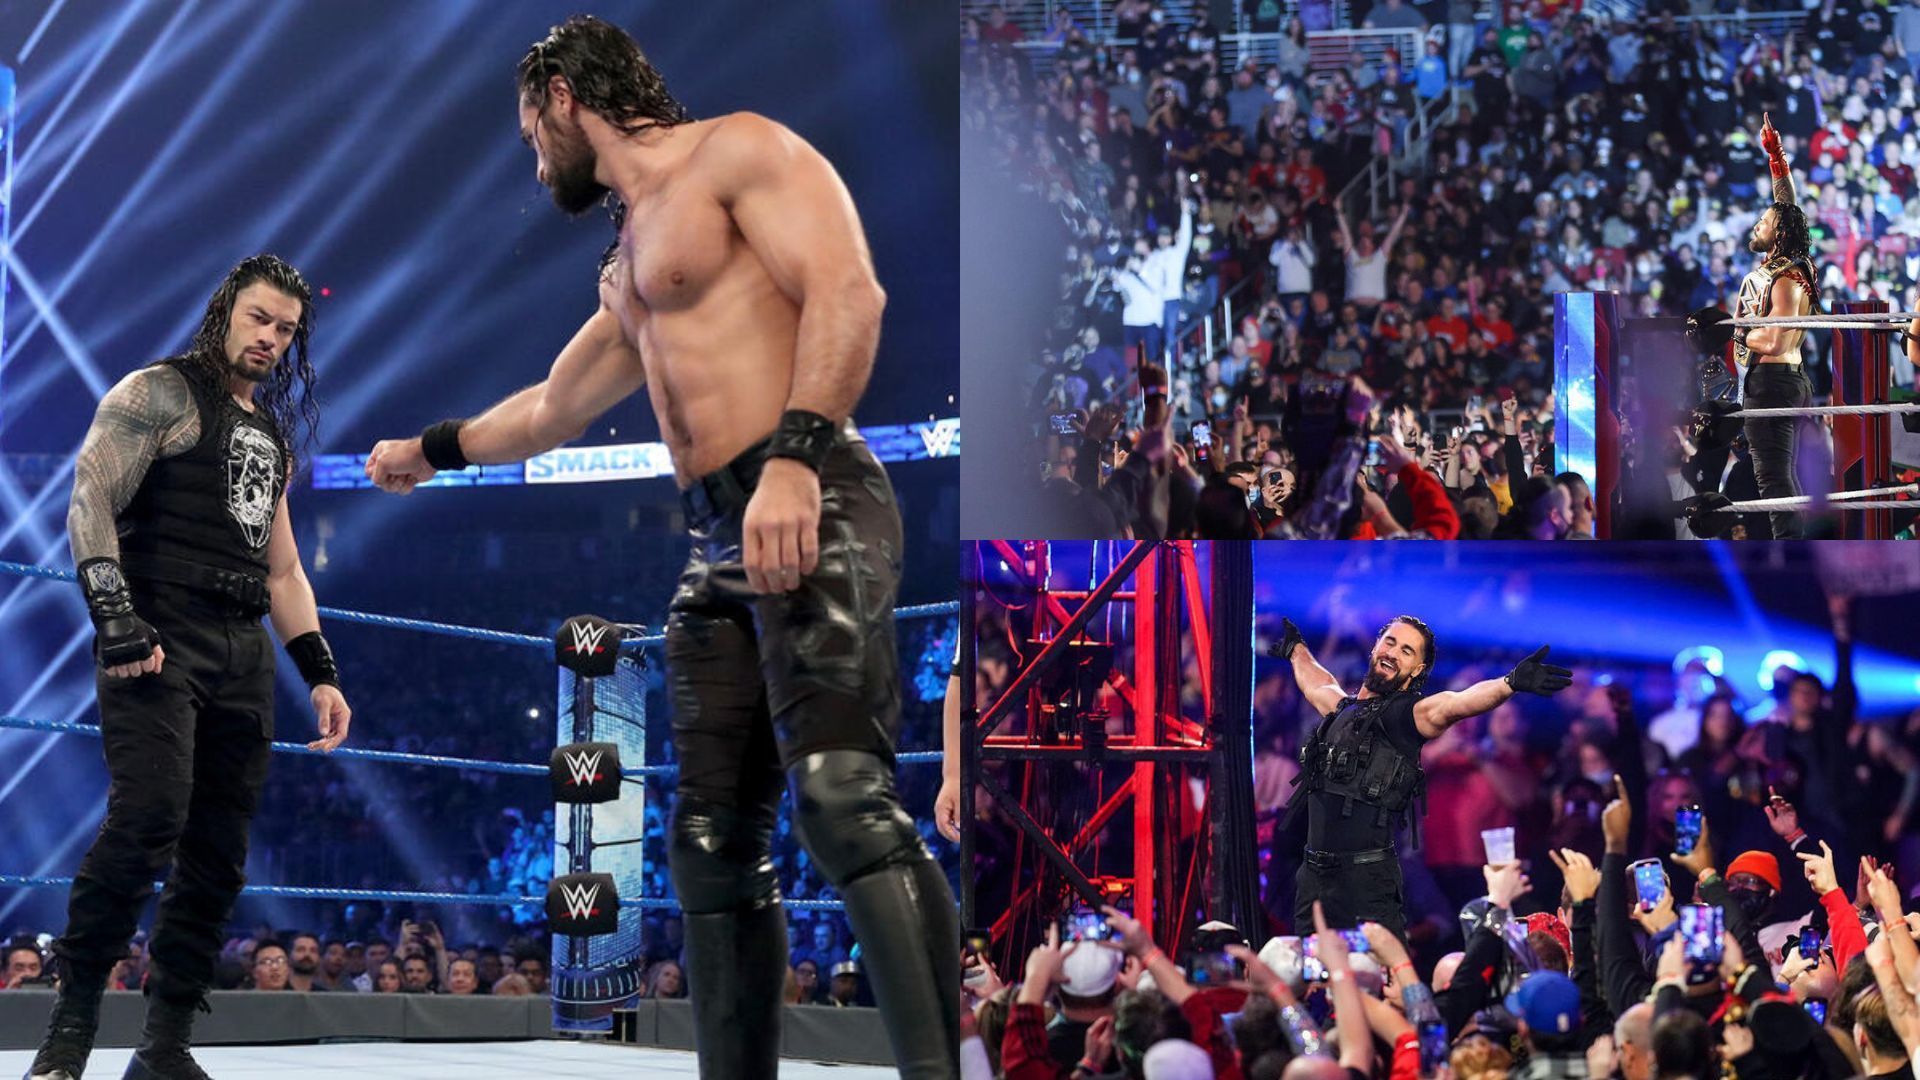 Seth Rollins and Roman Reigns are former Shield members